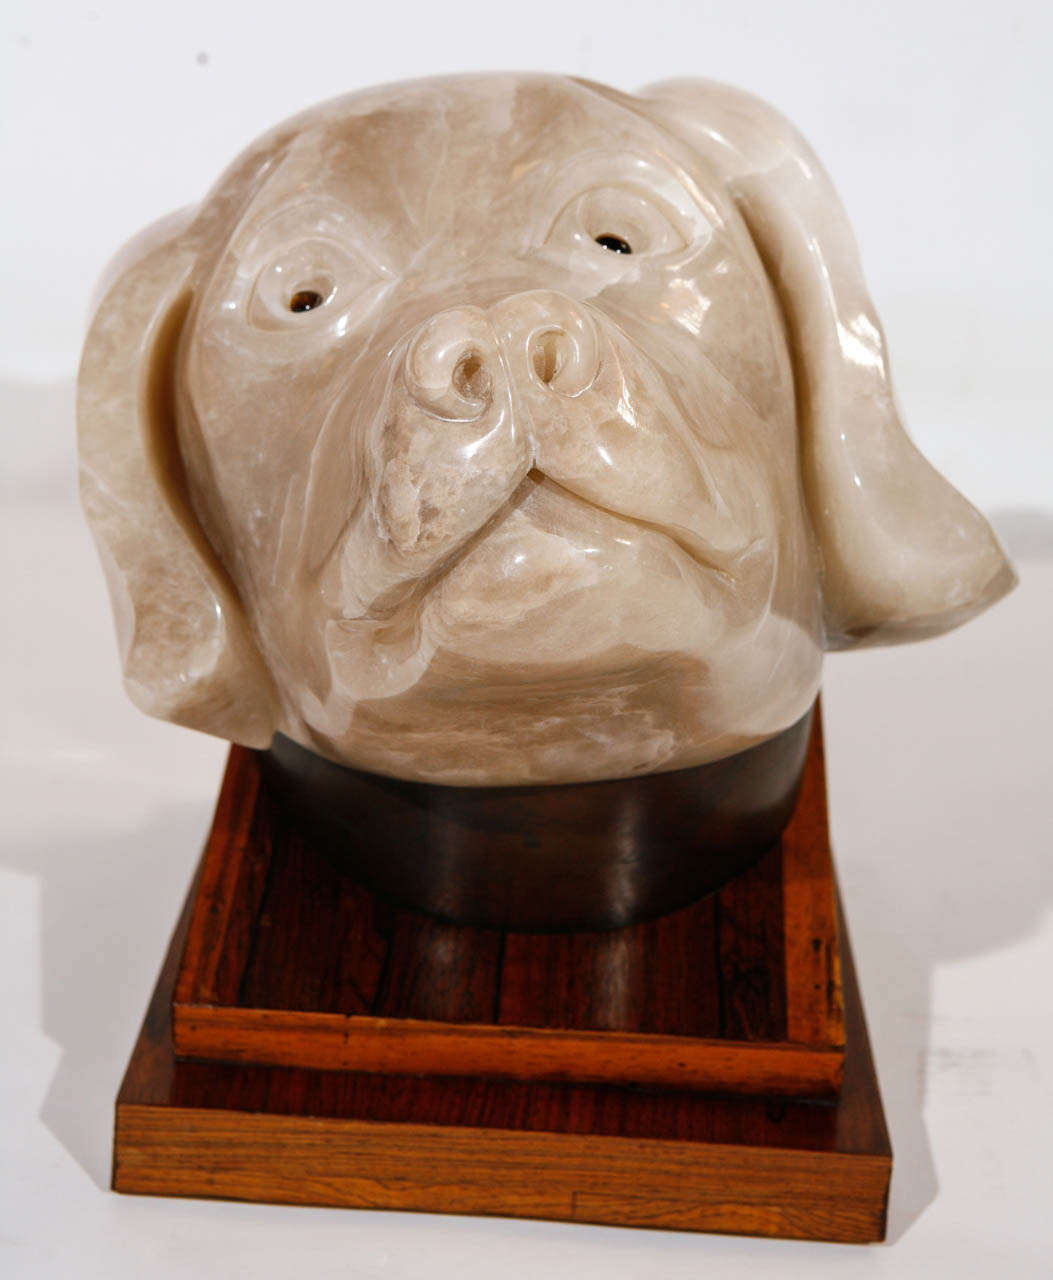 An amazing onyx dog sculpture by Albert Seltzer. It is mounted on a swivelling rosewood stand. The dog has eyes made out of chrysoberyl, commonly known as cat's eye.